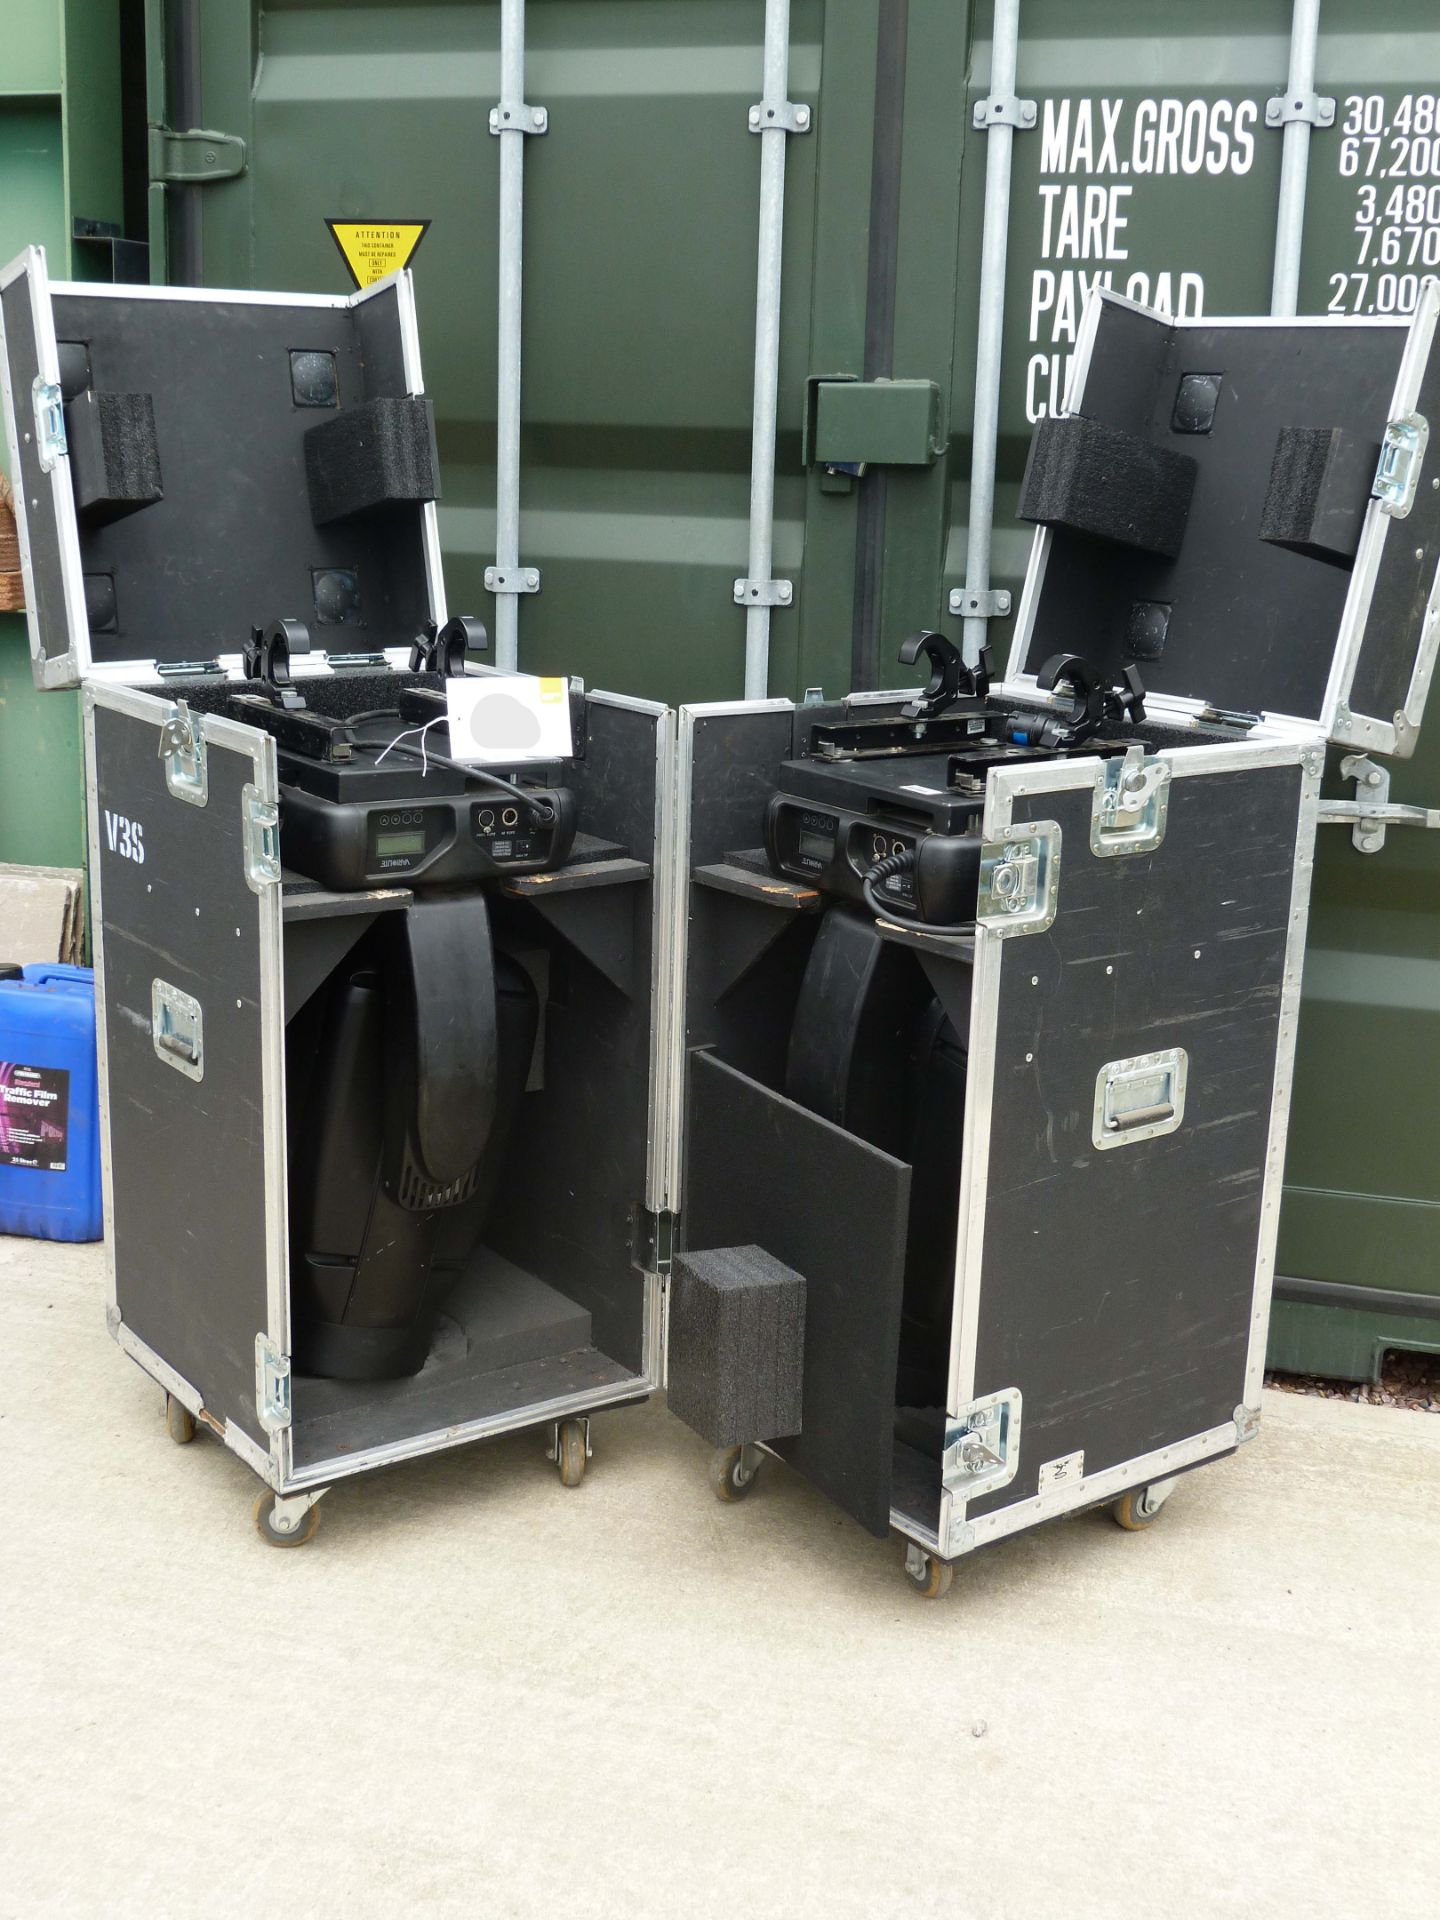 2 Varilite VL3500 wash FX luminaires with internal zoom feature, fresnel and Buxon options;